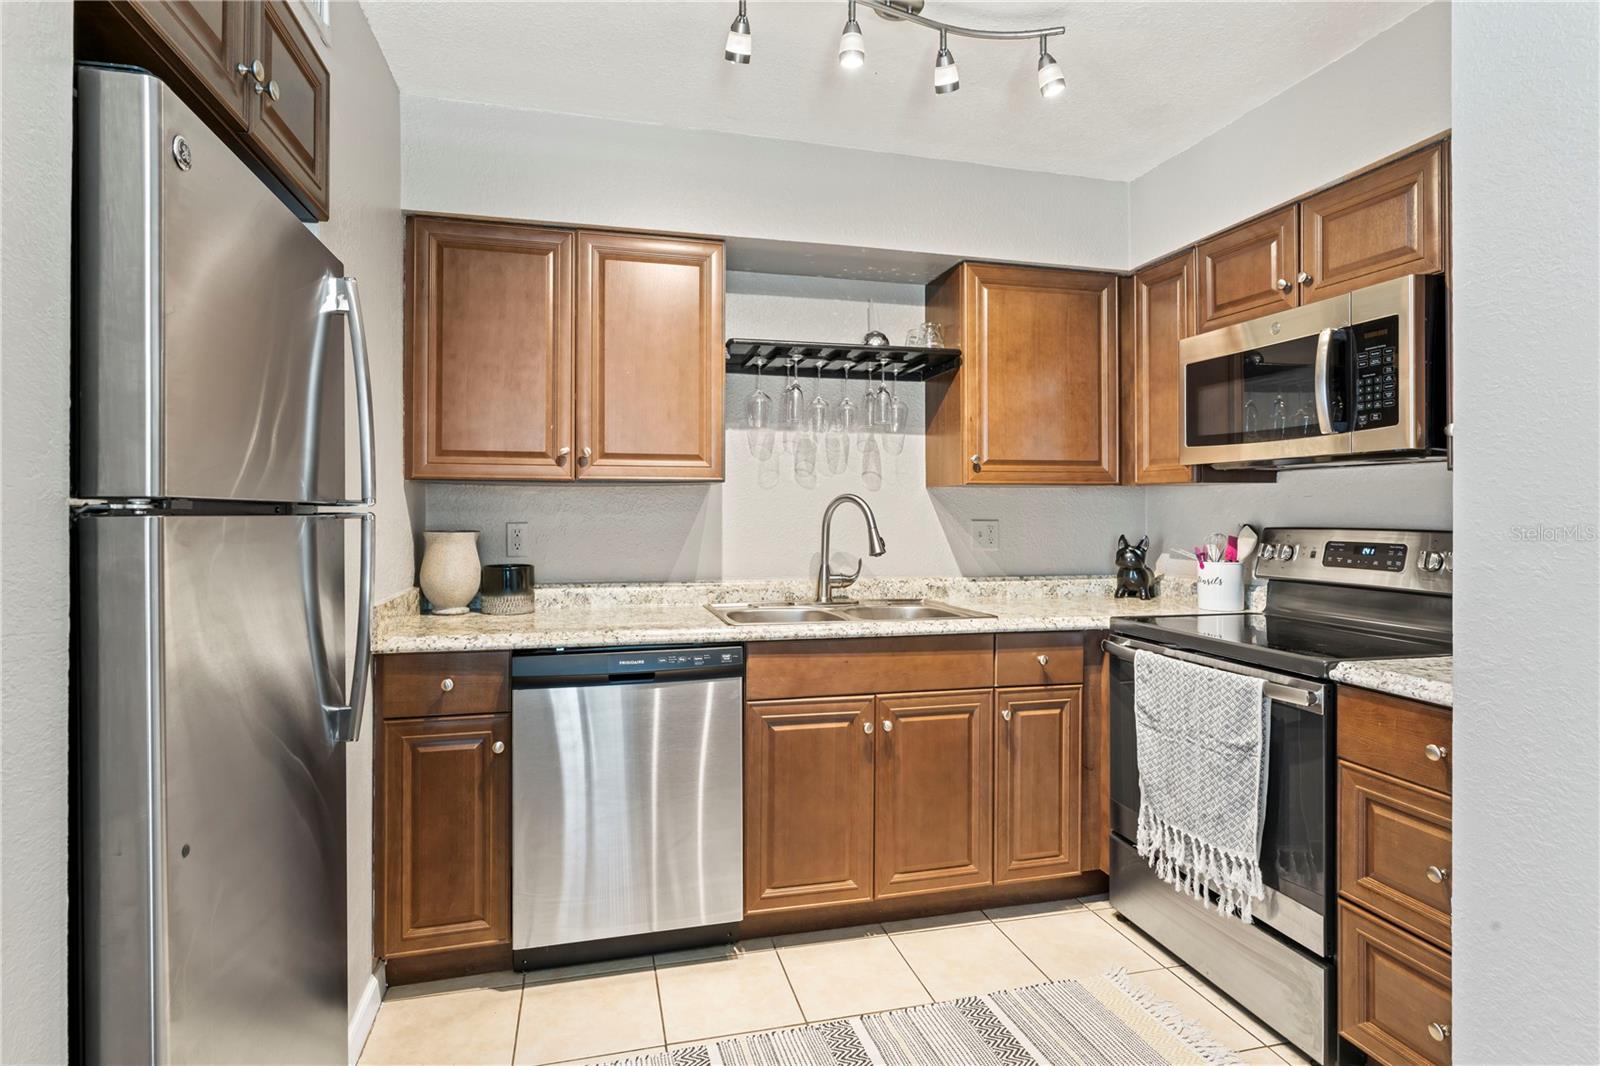 Kitchen with granite counter tops and stainless steel appliances.